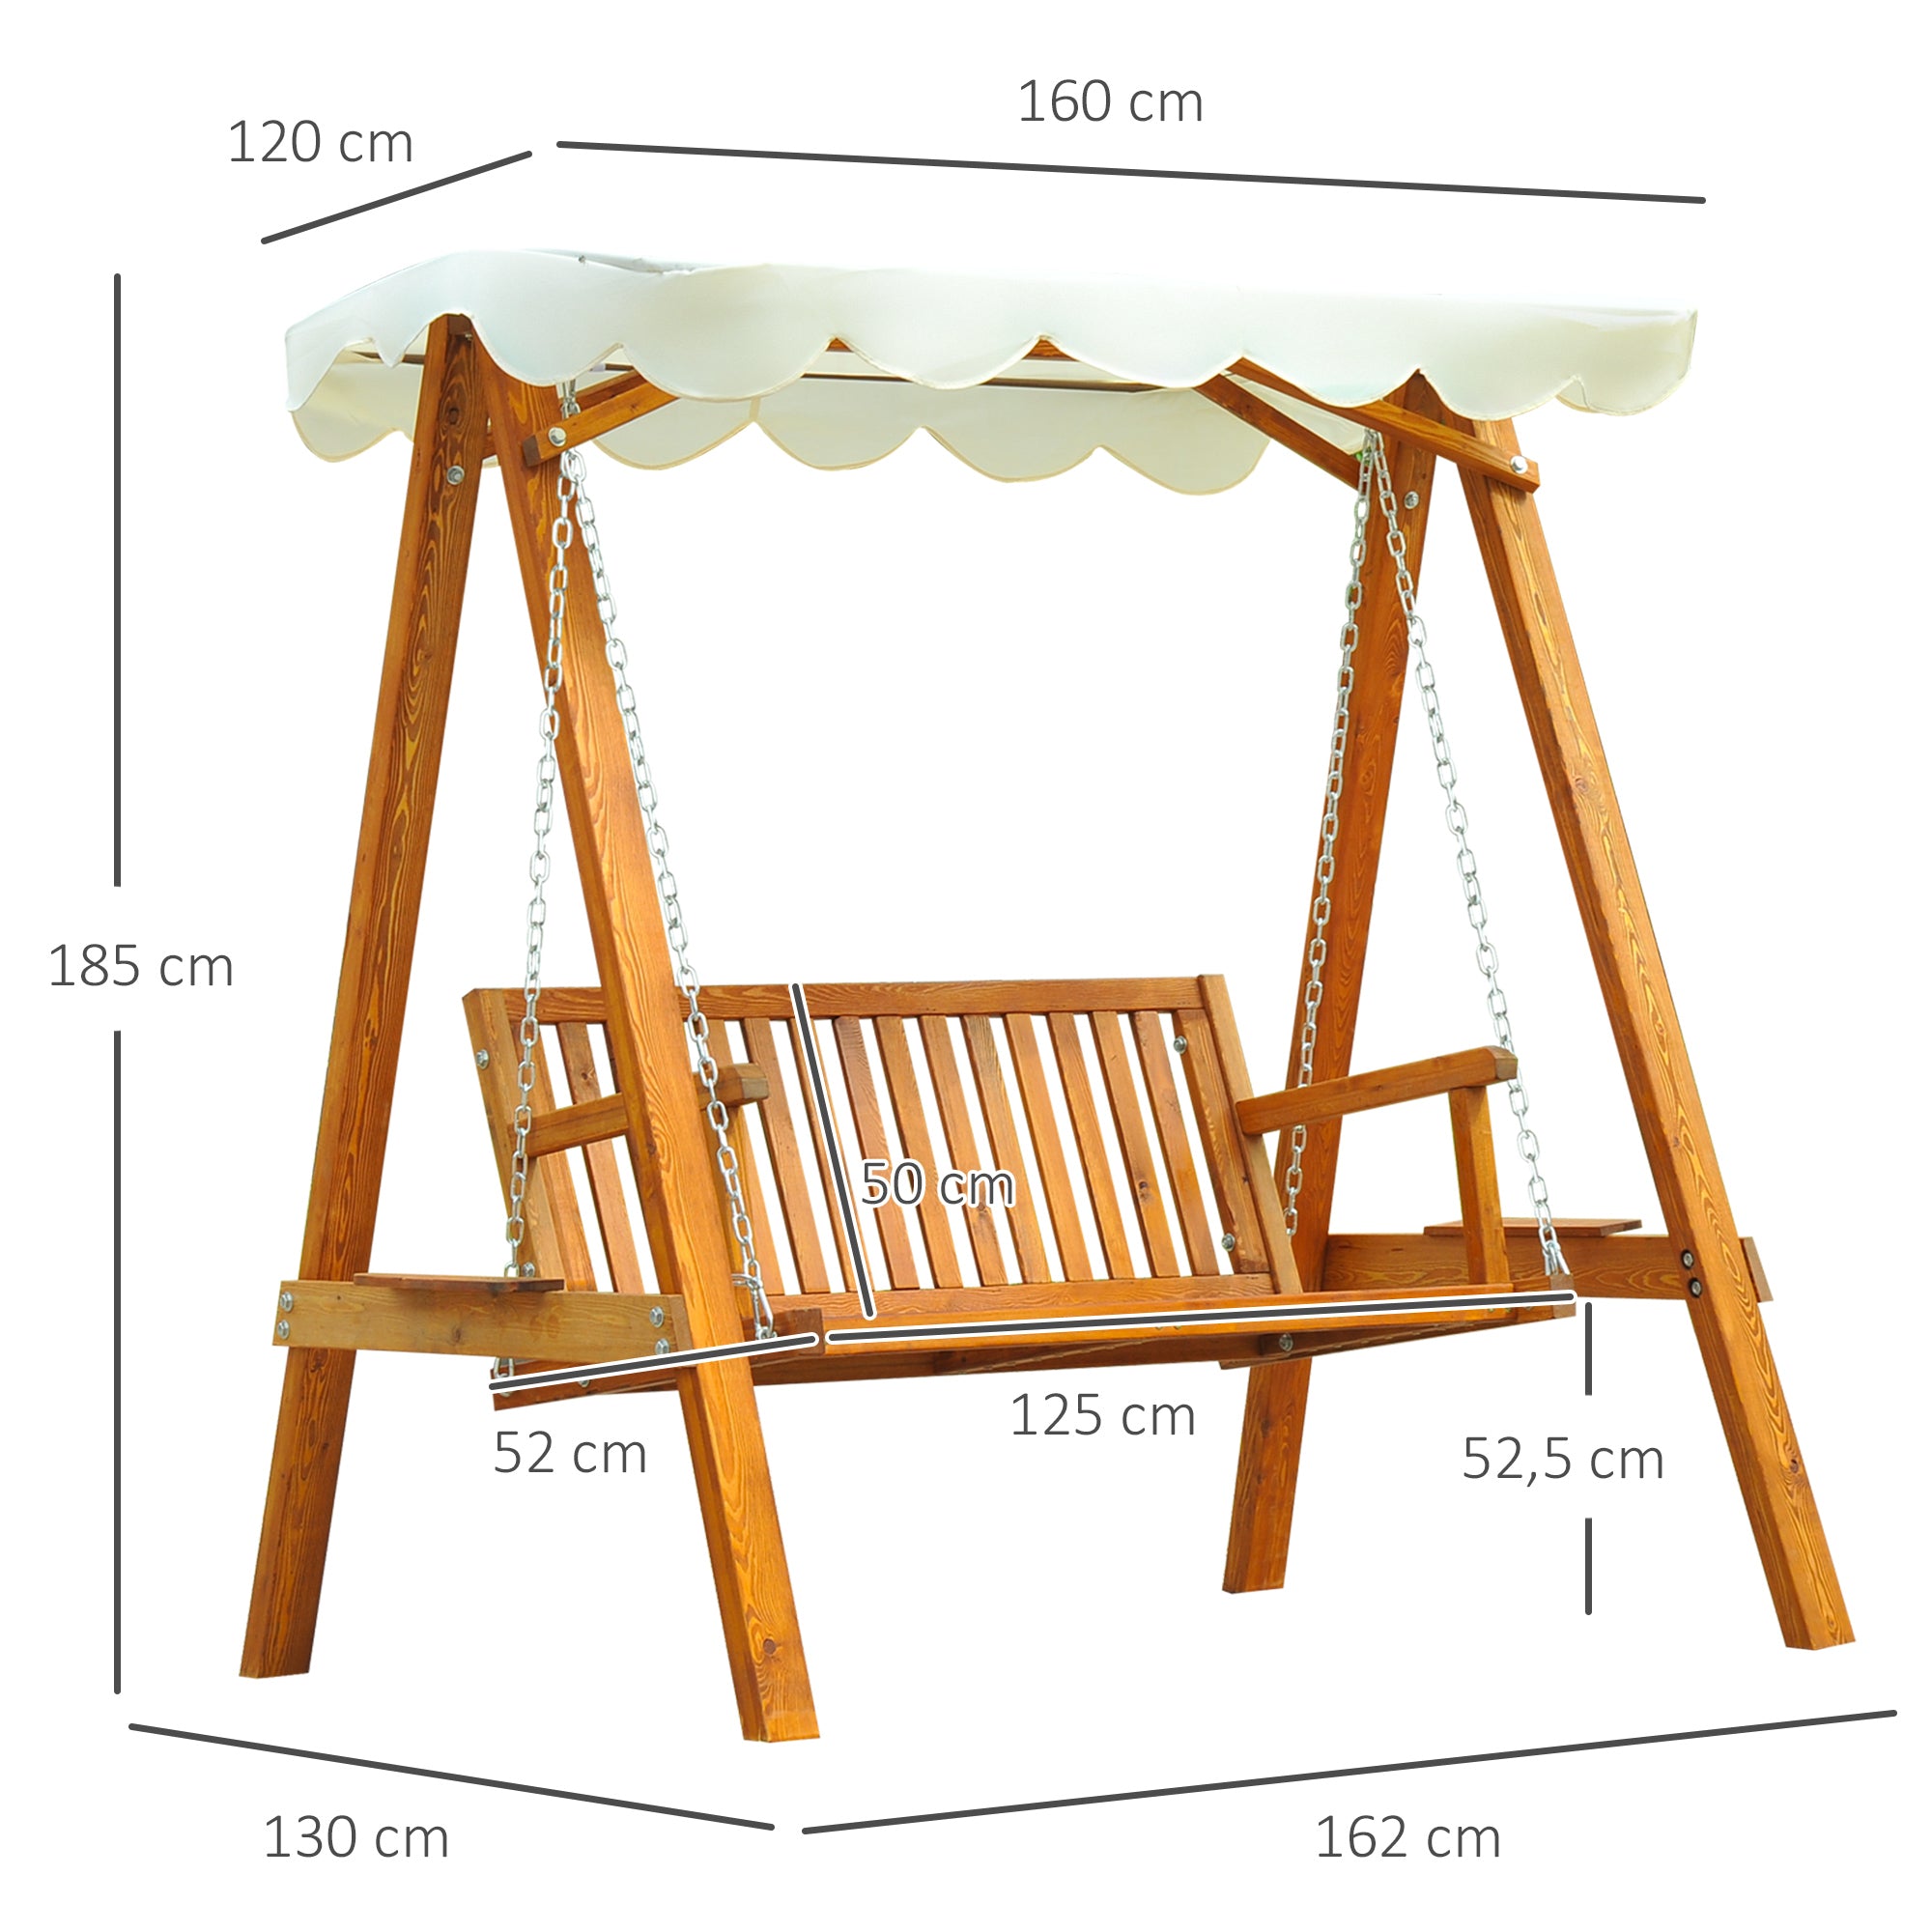 Outsunny 2 Seater Garden Swing Seat Wooden Swing Chair Outdoor Hammock Bench Furniture, Cream White - Inspirely